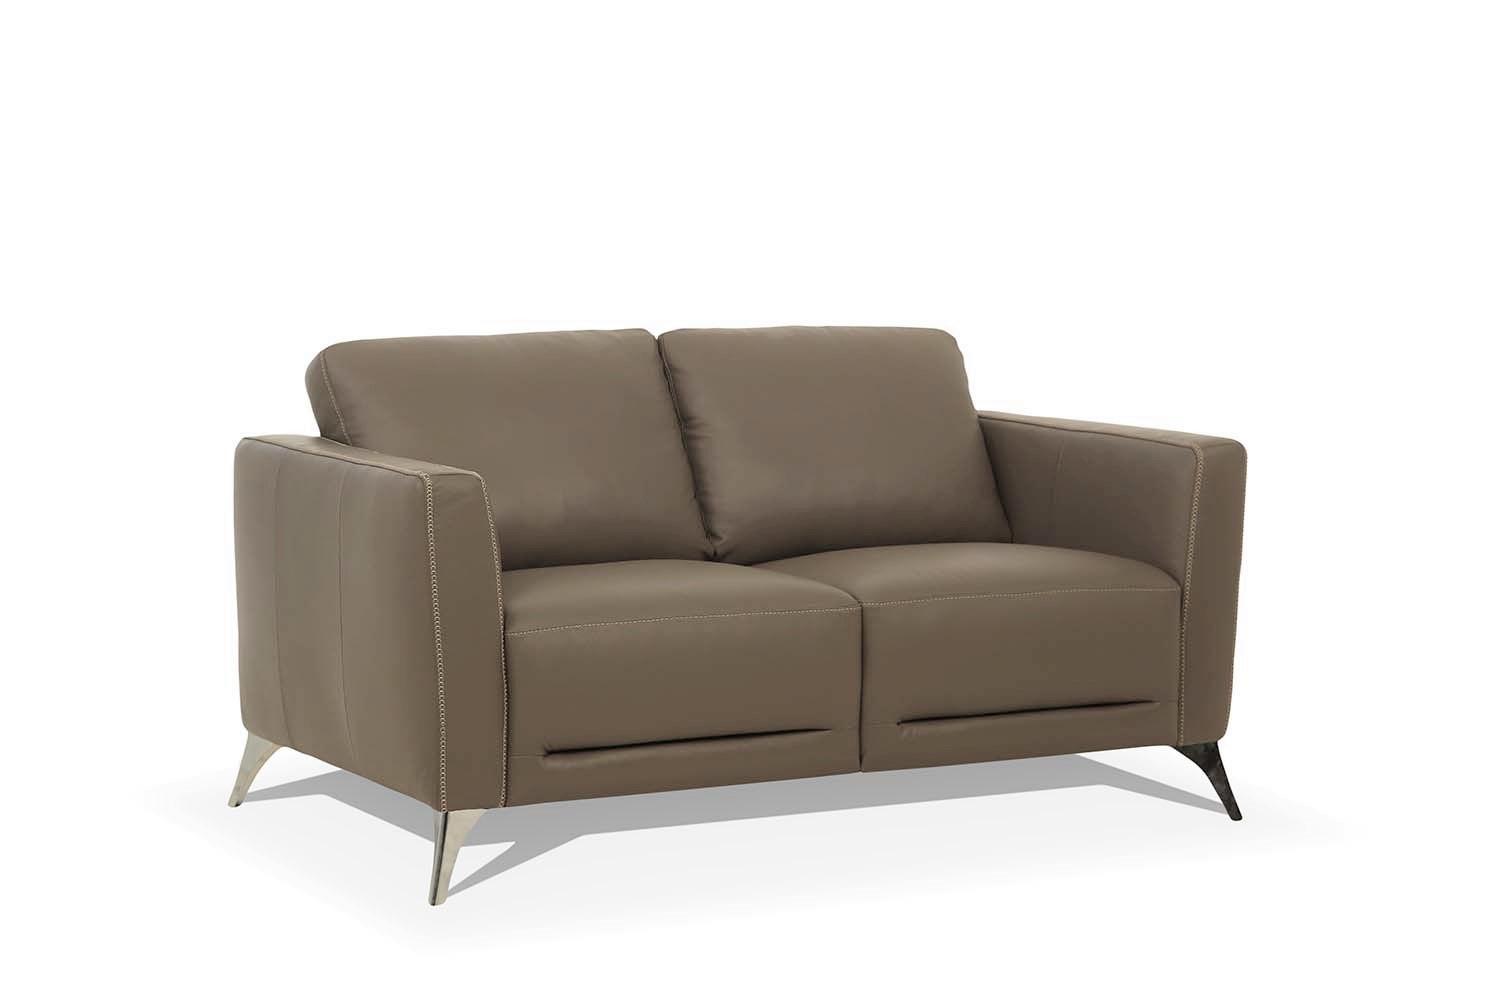 Transitional Loveseat Malaga 55001 in Brown Leather